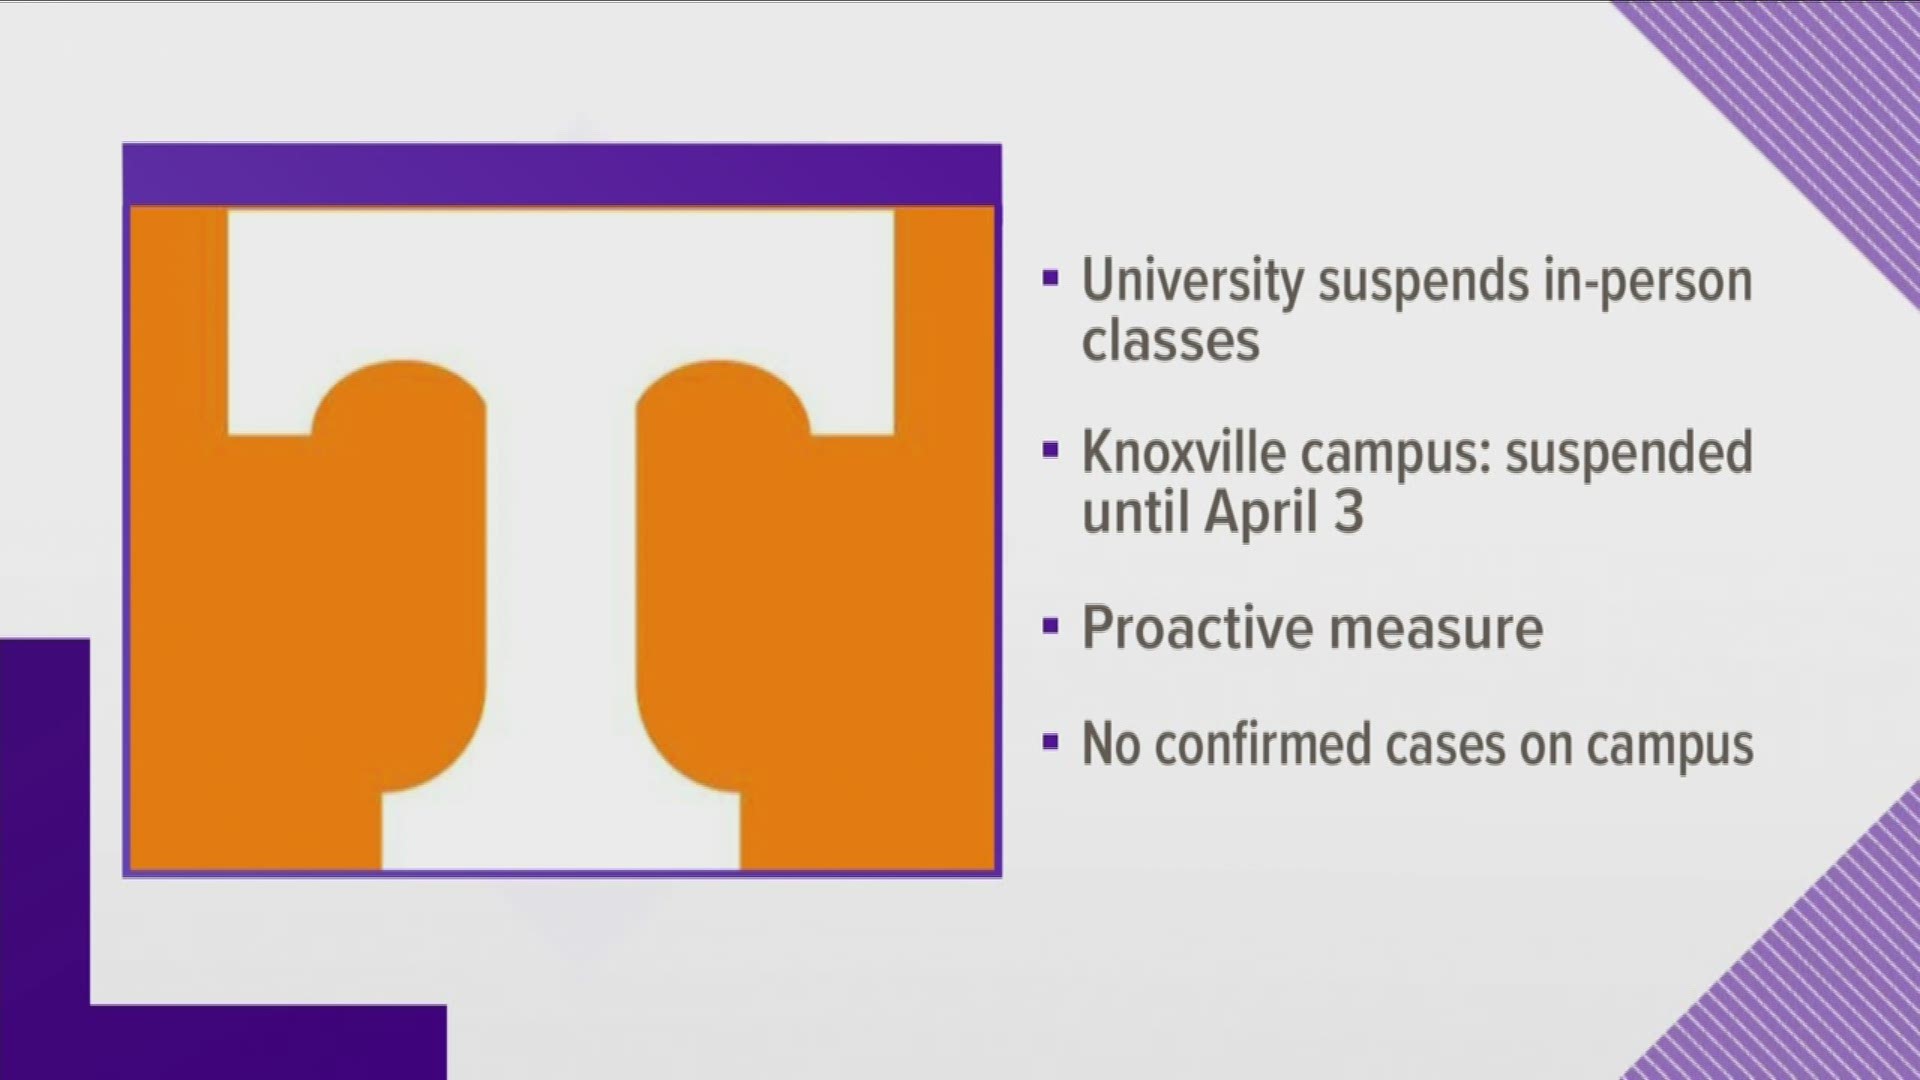 The suspension starts on March 23. The University of Tennessee at Knoxville will be suspended until April 3.